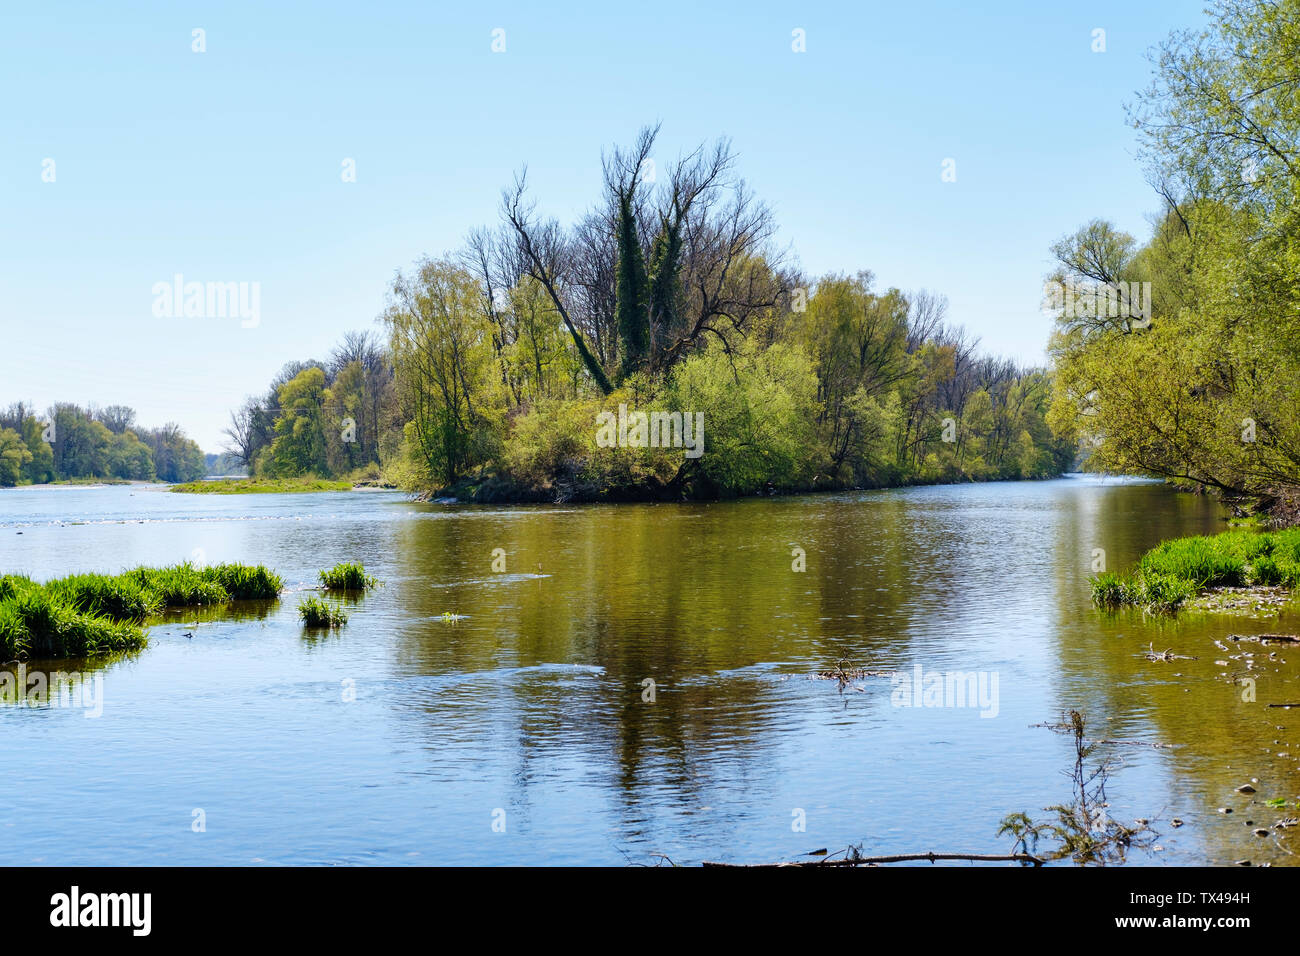 Germany, Augsburg Oberhausen, river mouth Wertach river and Lech river Stock Photo